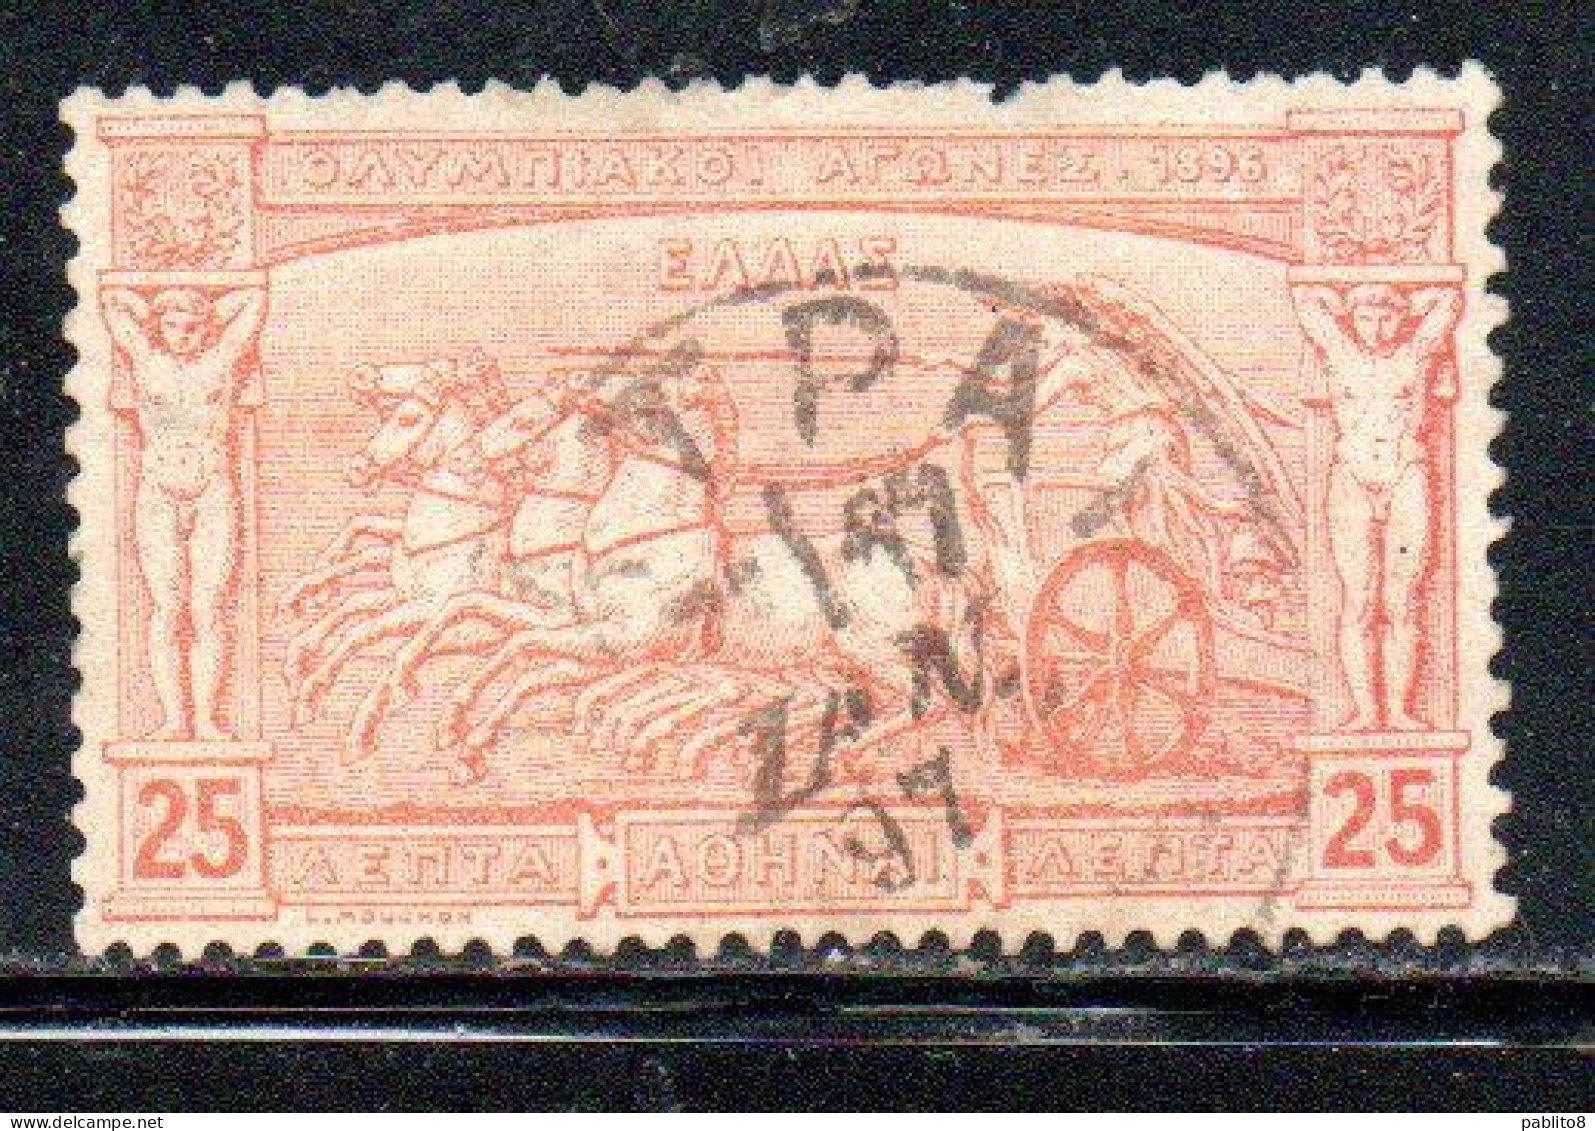 GREECE GRECIA HELLAS 1896 FIRST OLYMPIC GAMES MODERN ERA AT ATHENS CHARIOT DRIVING 25l USED USATO OBLITERE' - Used Stamps